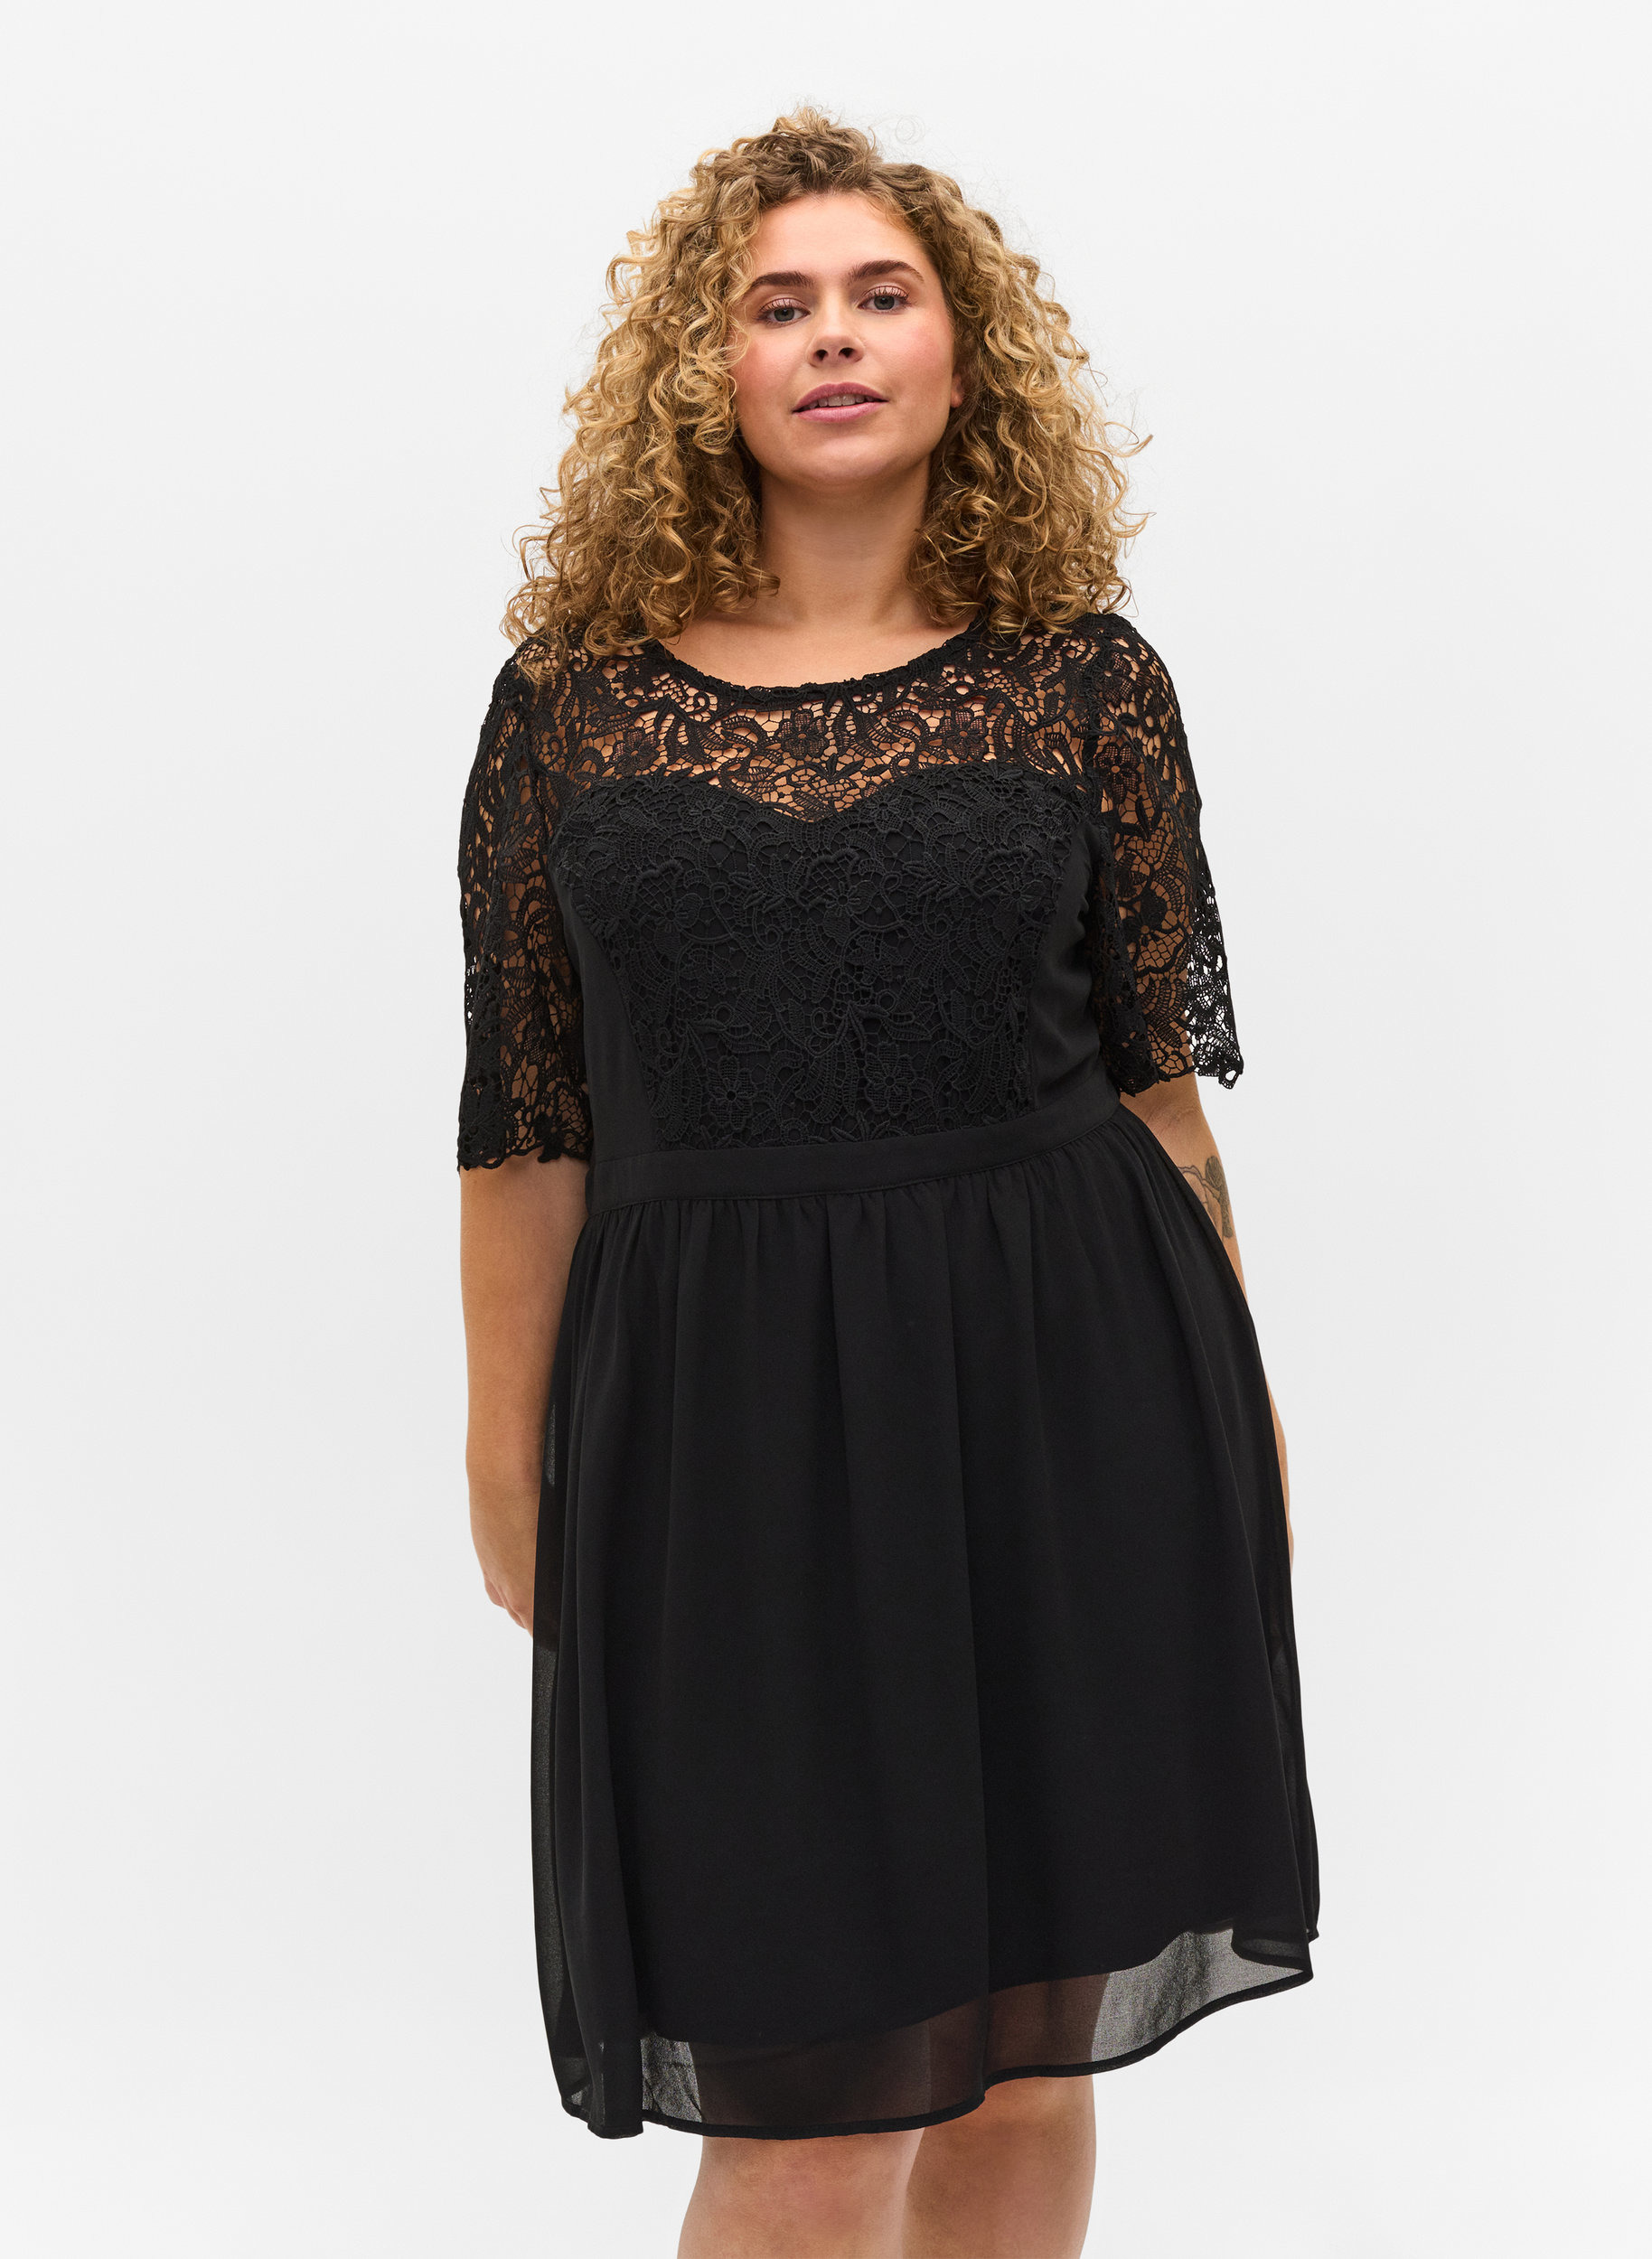 Short Sleeve dress with a lace top ...